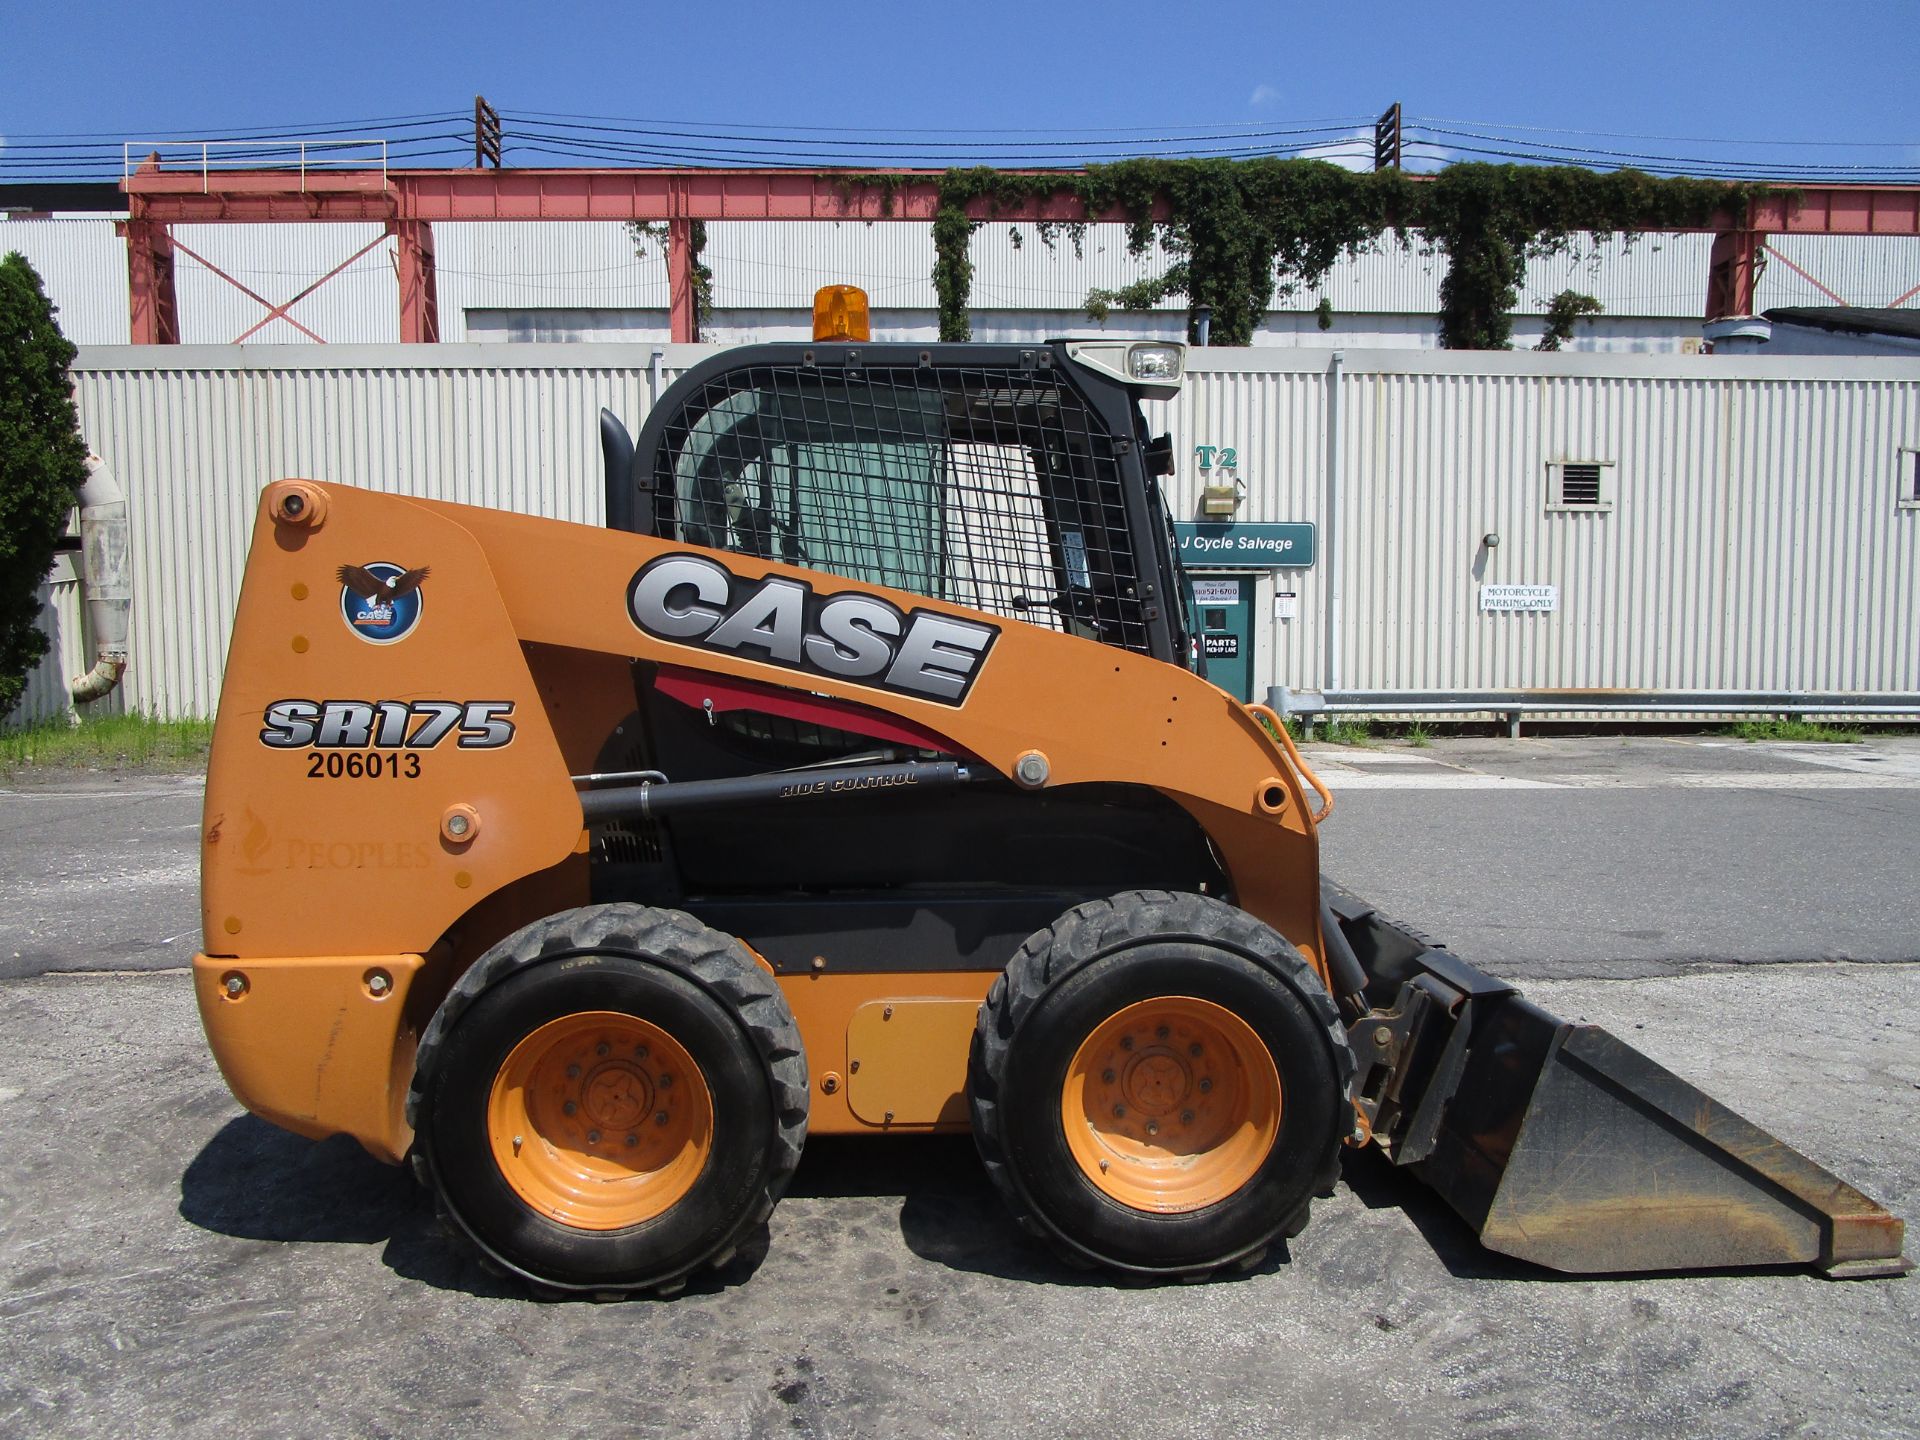 2012 Case SR175 High-Flow Skid Steer Loader -Low Hours Enclosed Cab Located in Lester, PA - Image 4 of 12